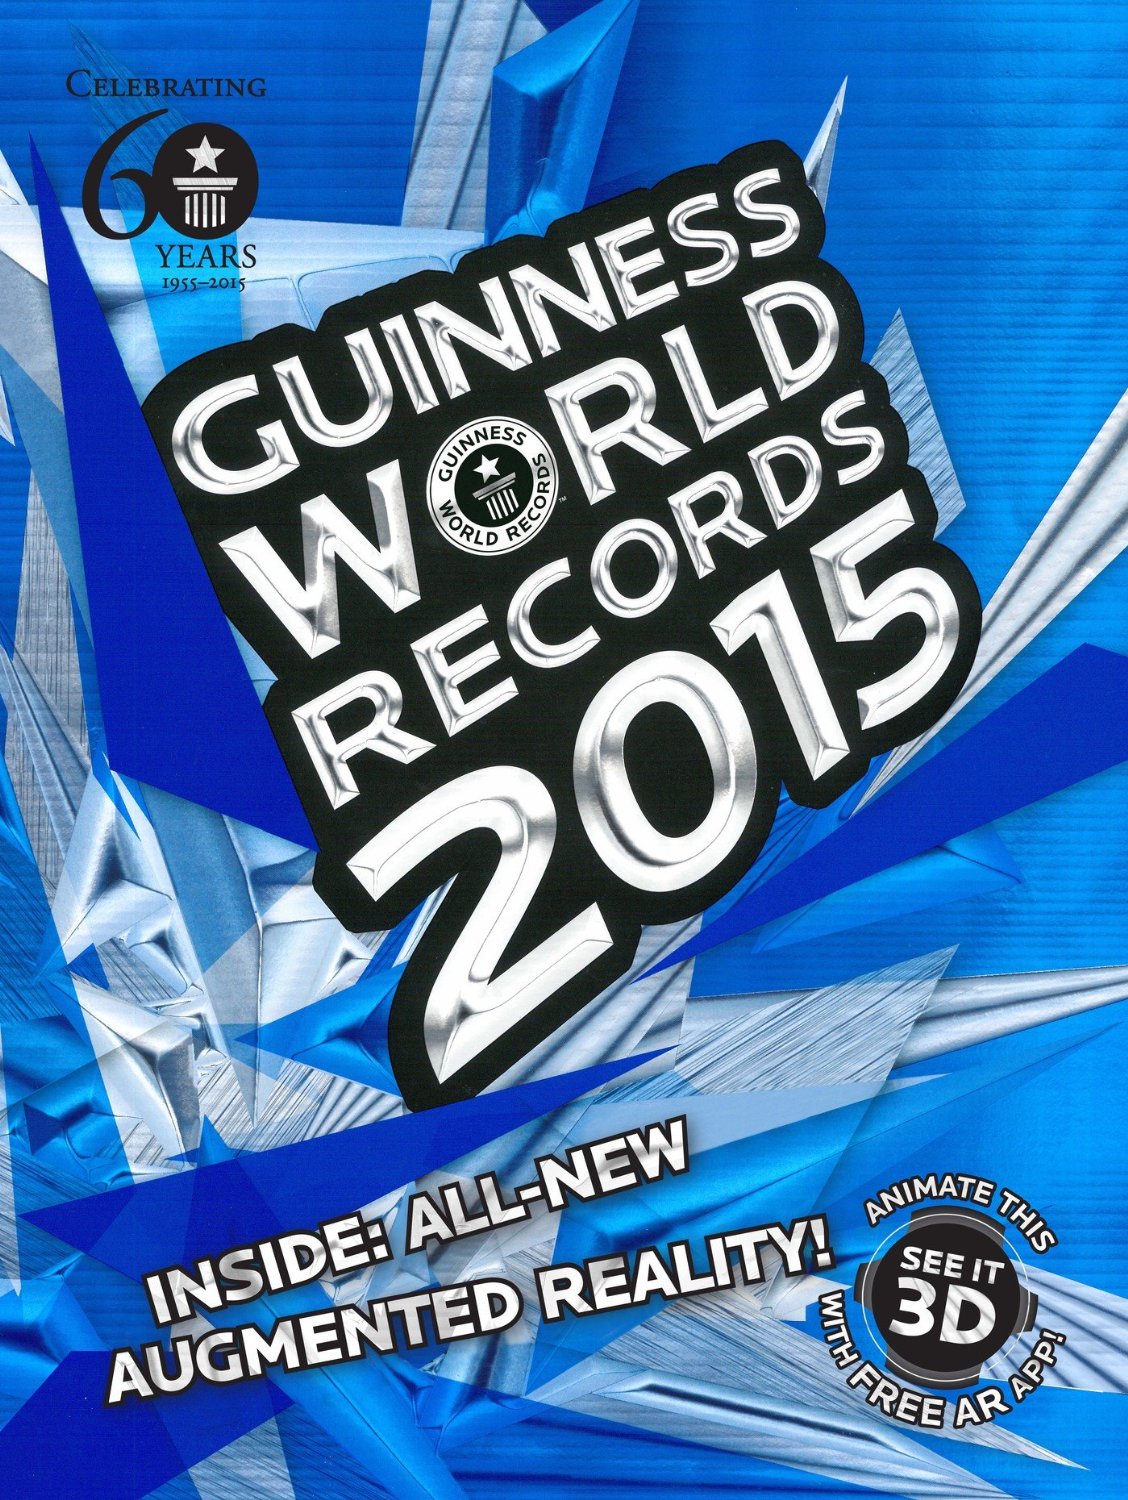 guinness world records 2015 - Celebrating Ini Years Guinness World Records 5015 Imates Inside AllNew Augmented Reality! Ree Ab